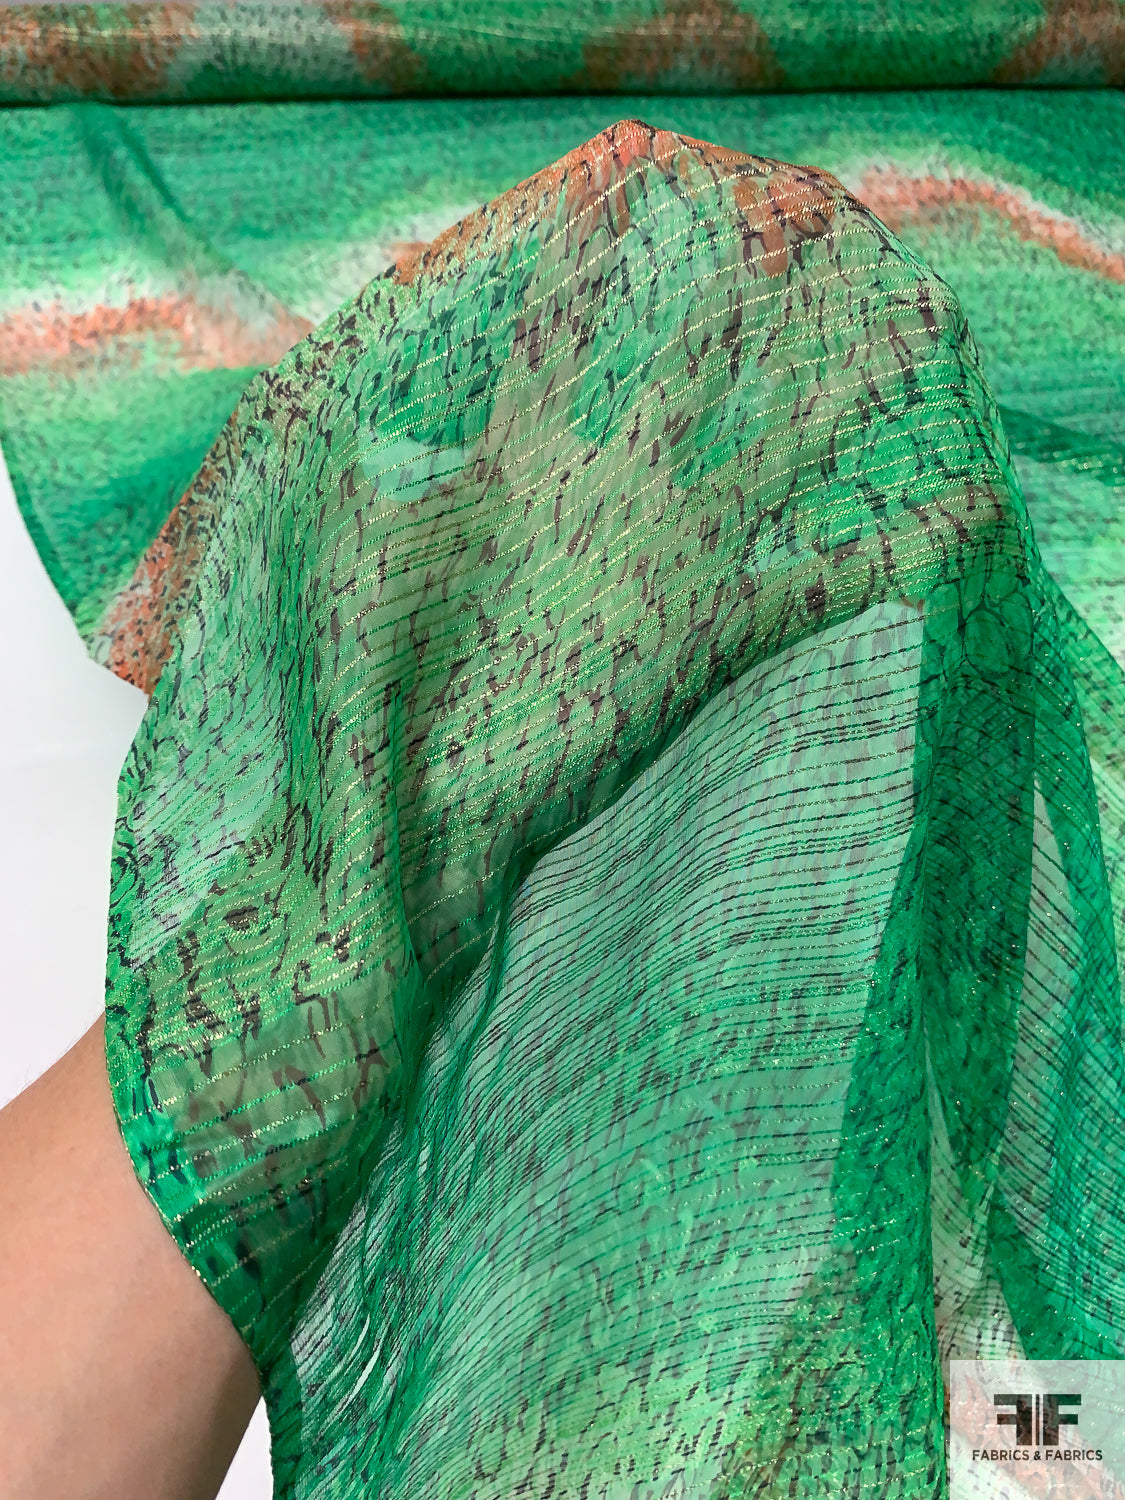 Amazon Jungle Inspired Silk Chiffon with Threadwork and Lurex Pinstripes - Green / Coral-Brown / Black / Gold